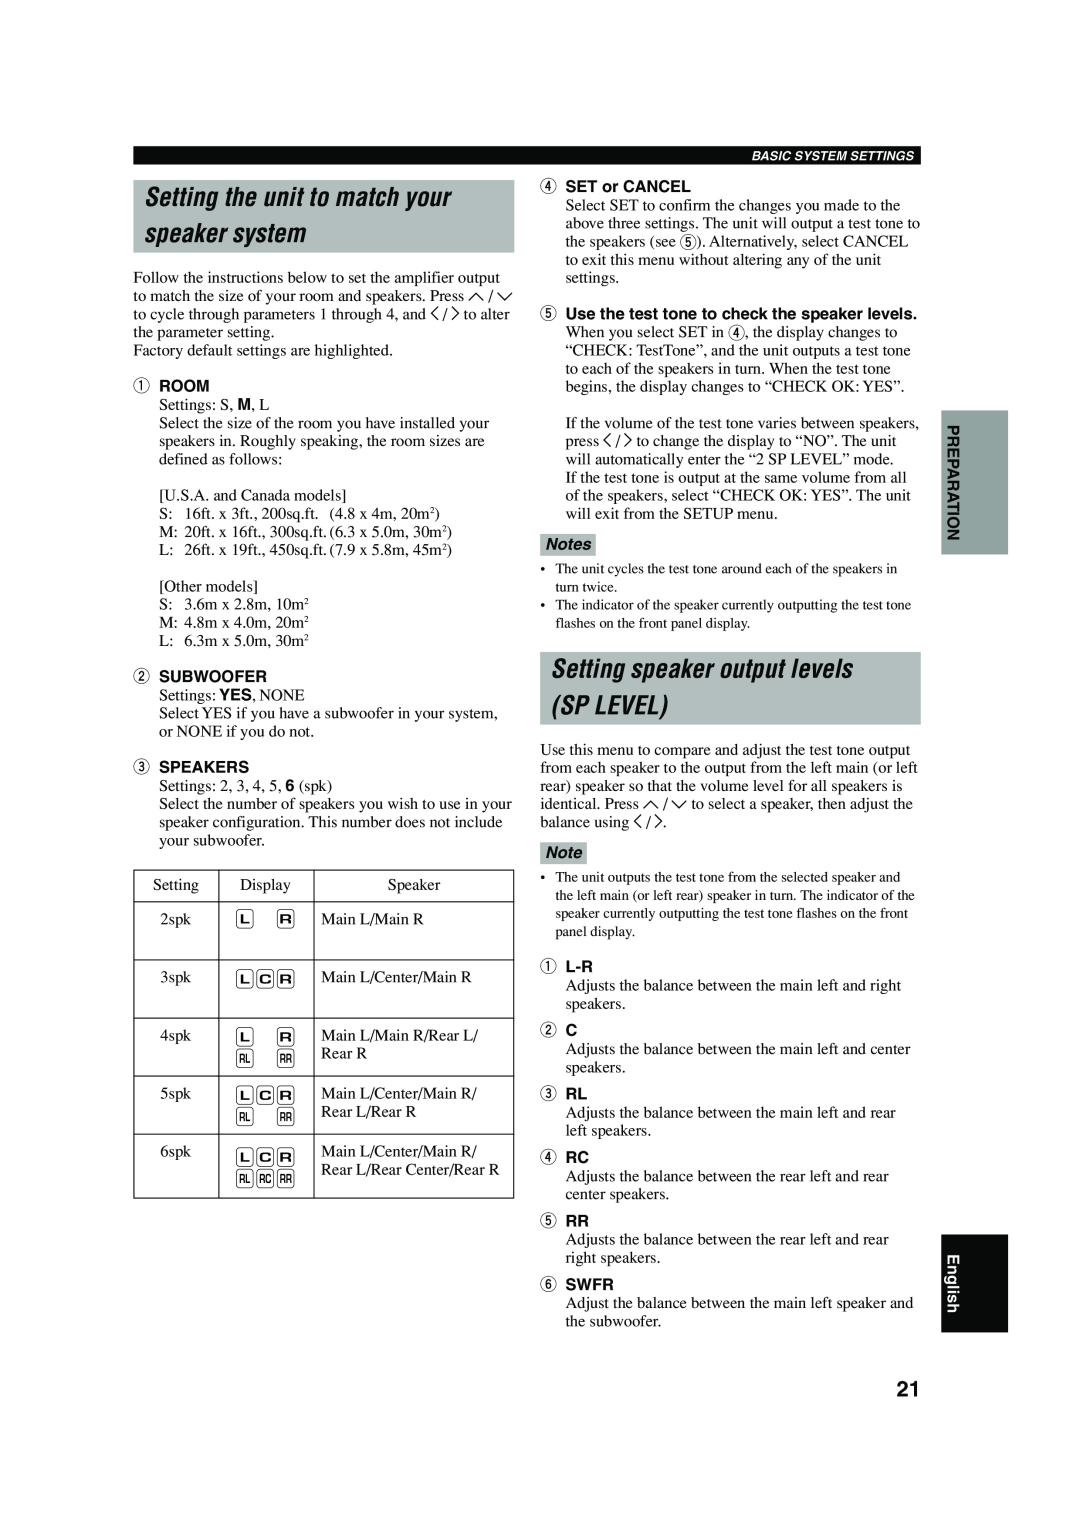 Yamaha HTR-5640 owner manual Setting the unit to match your speaker system, Setting speaker output levels SP LEVEL, English 